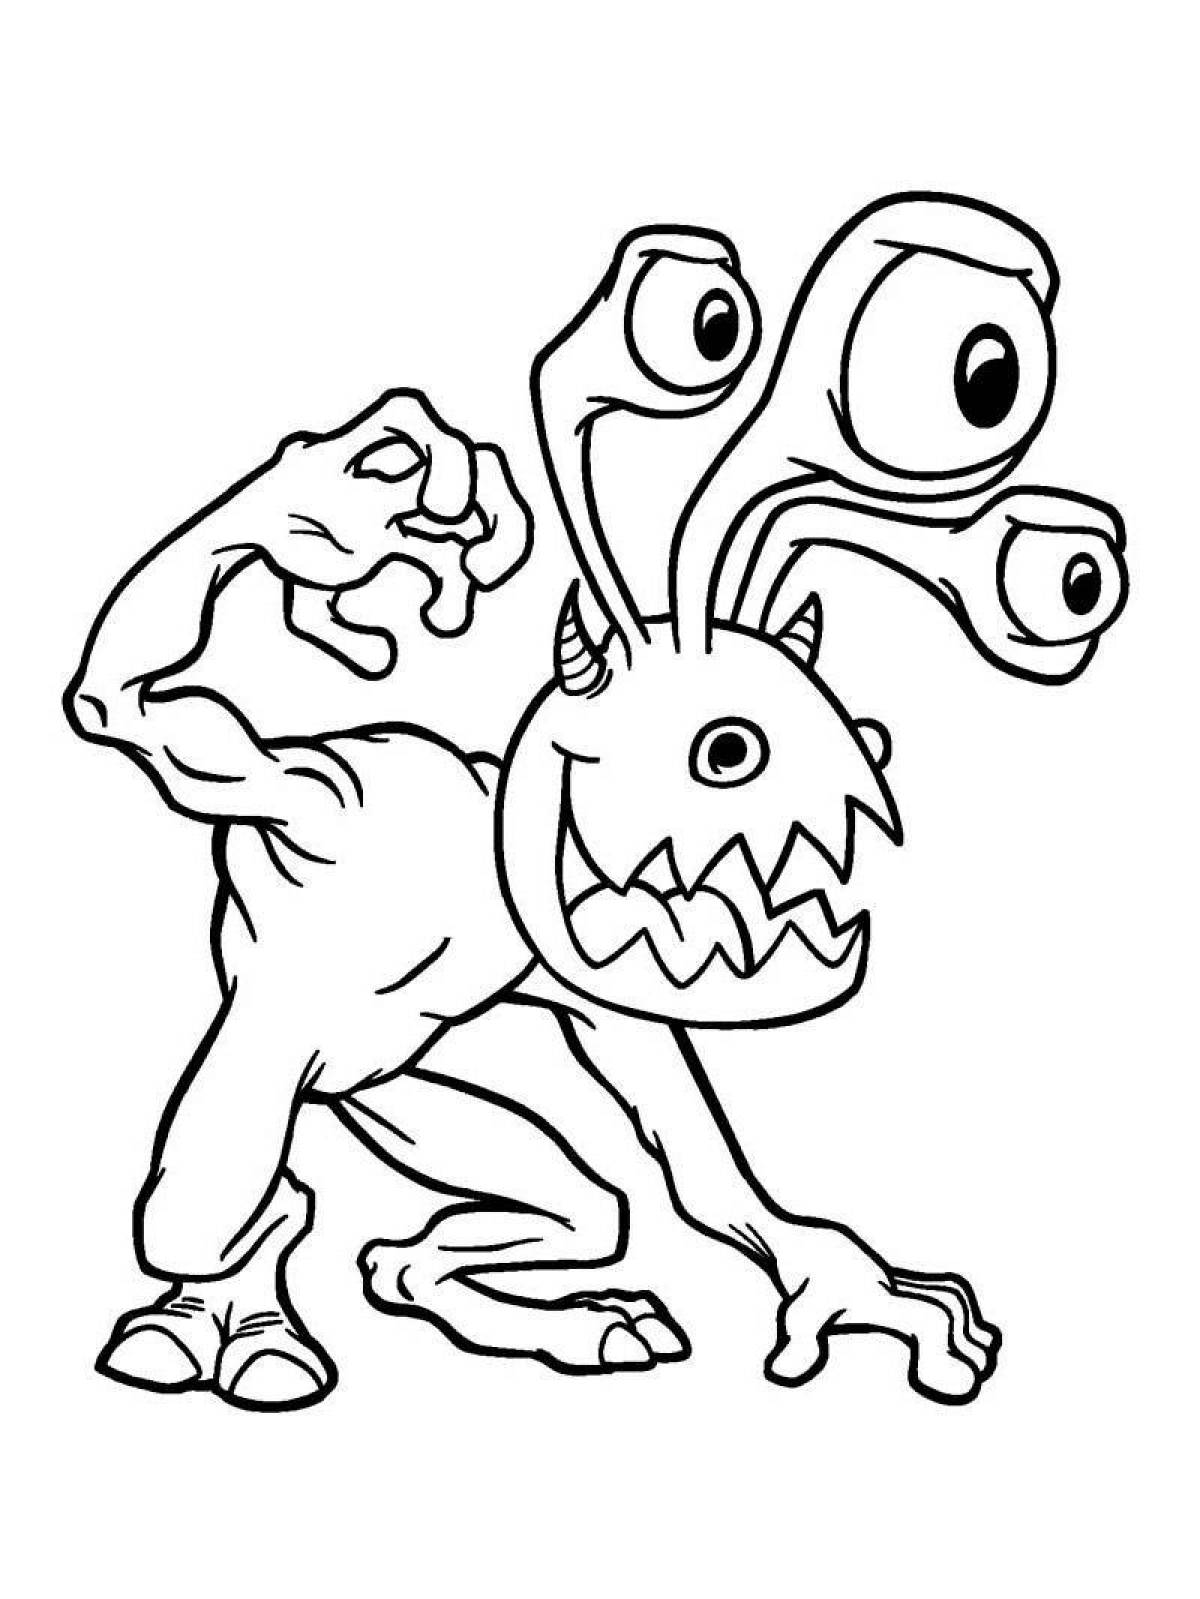 Kiwi willy coloring page